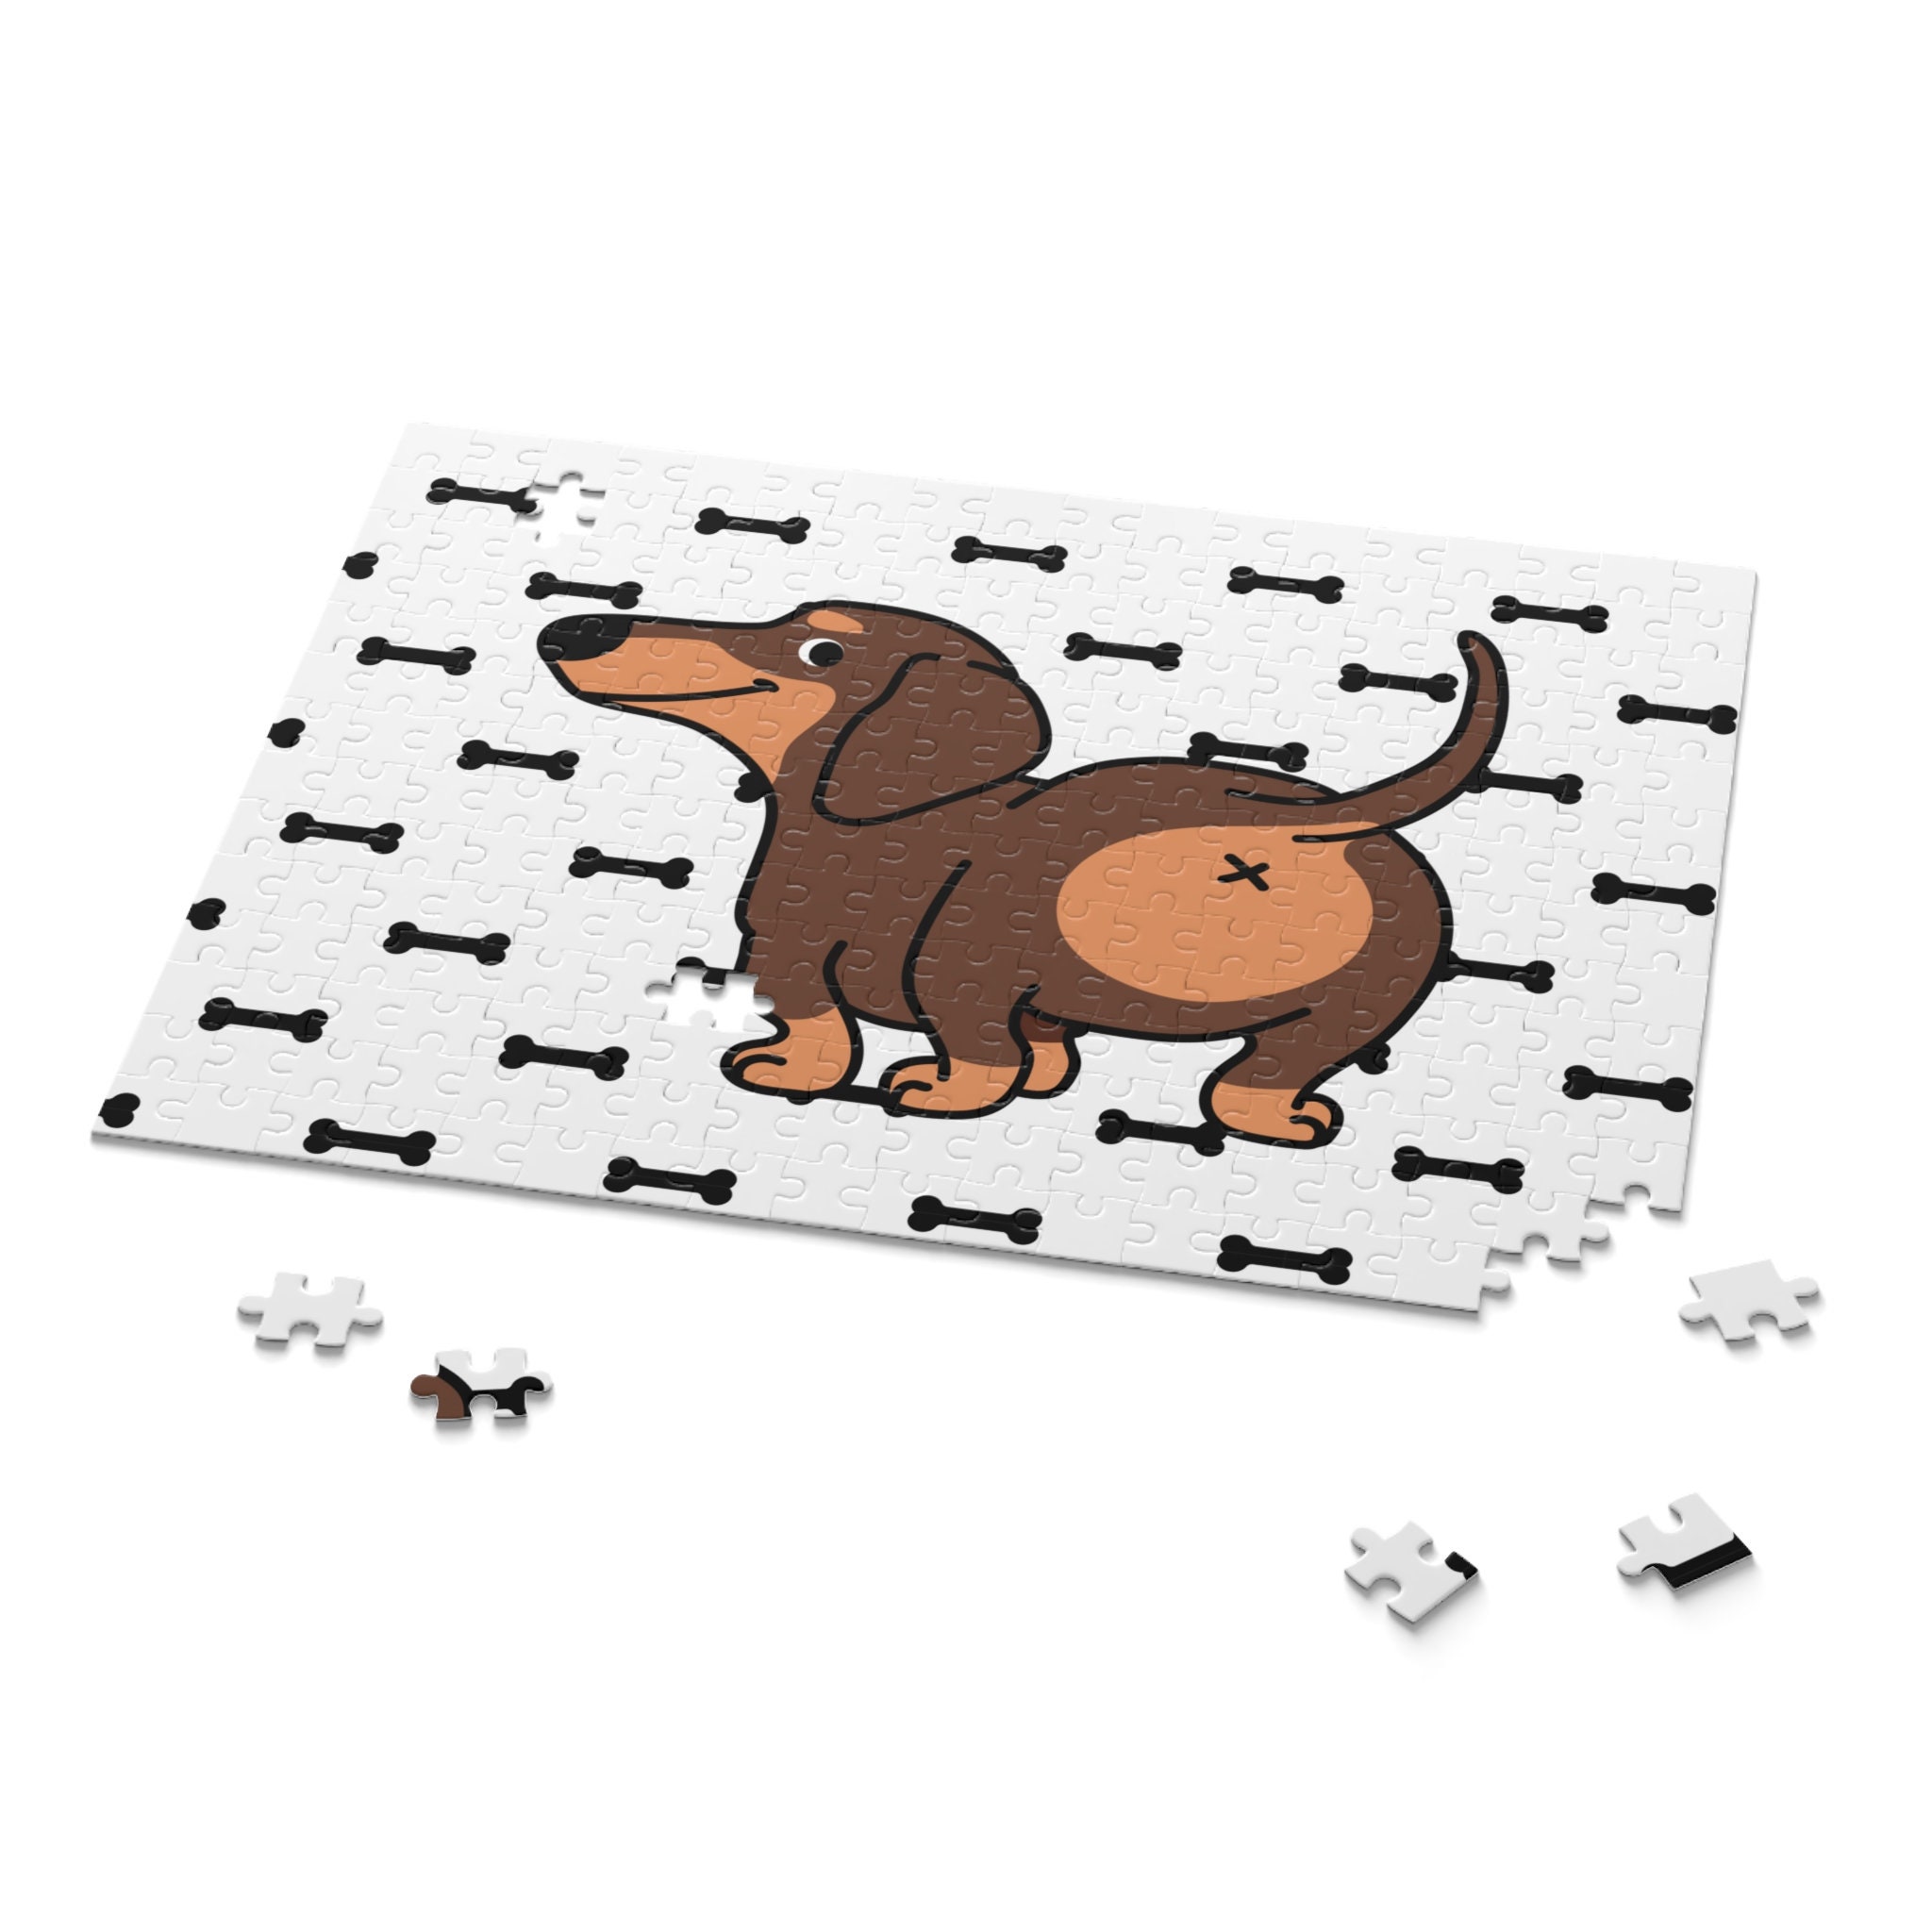 Puzzle, Funny Puzzle, Dogs, Dog Puzzle, Games, Game Night, Funny